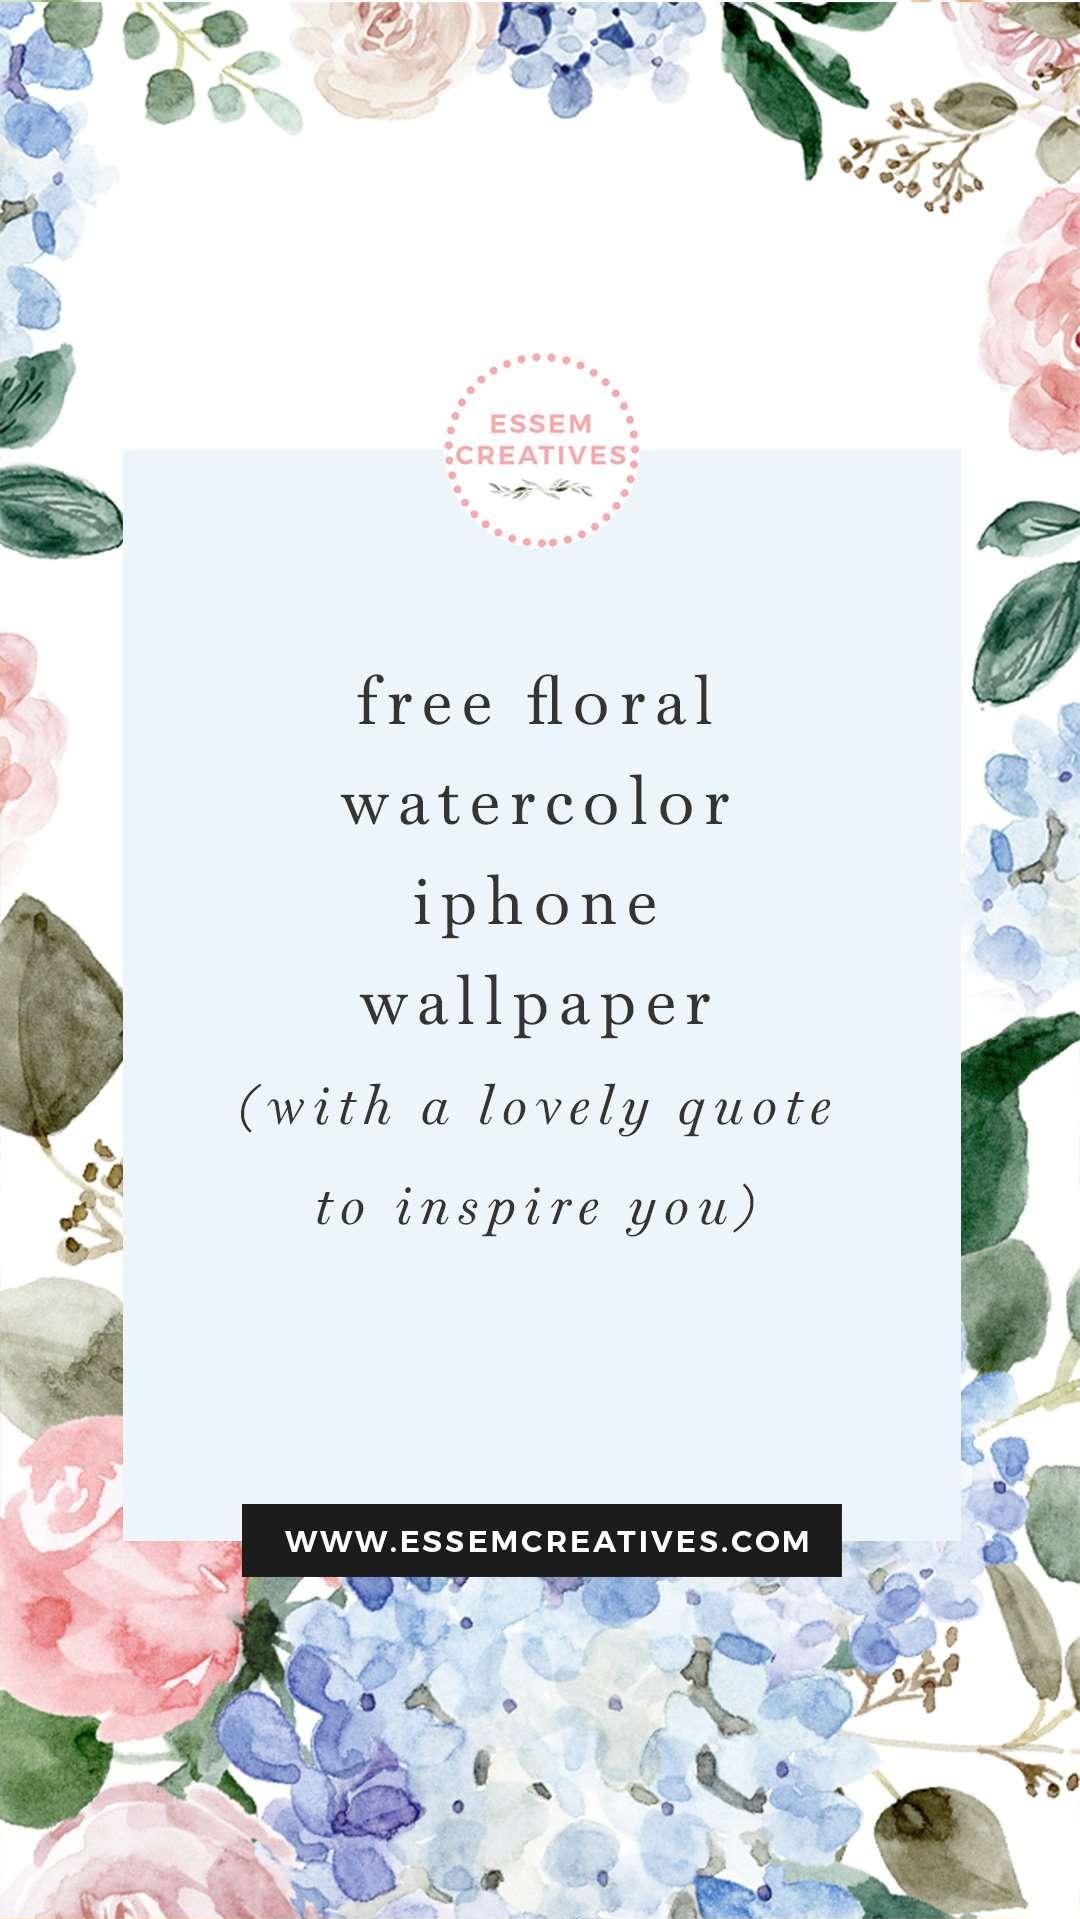 Postcard From Maldives And A Floral Watercolor Wallpaper For